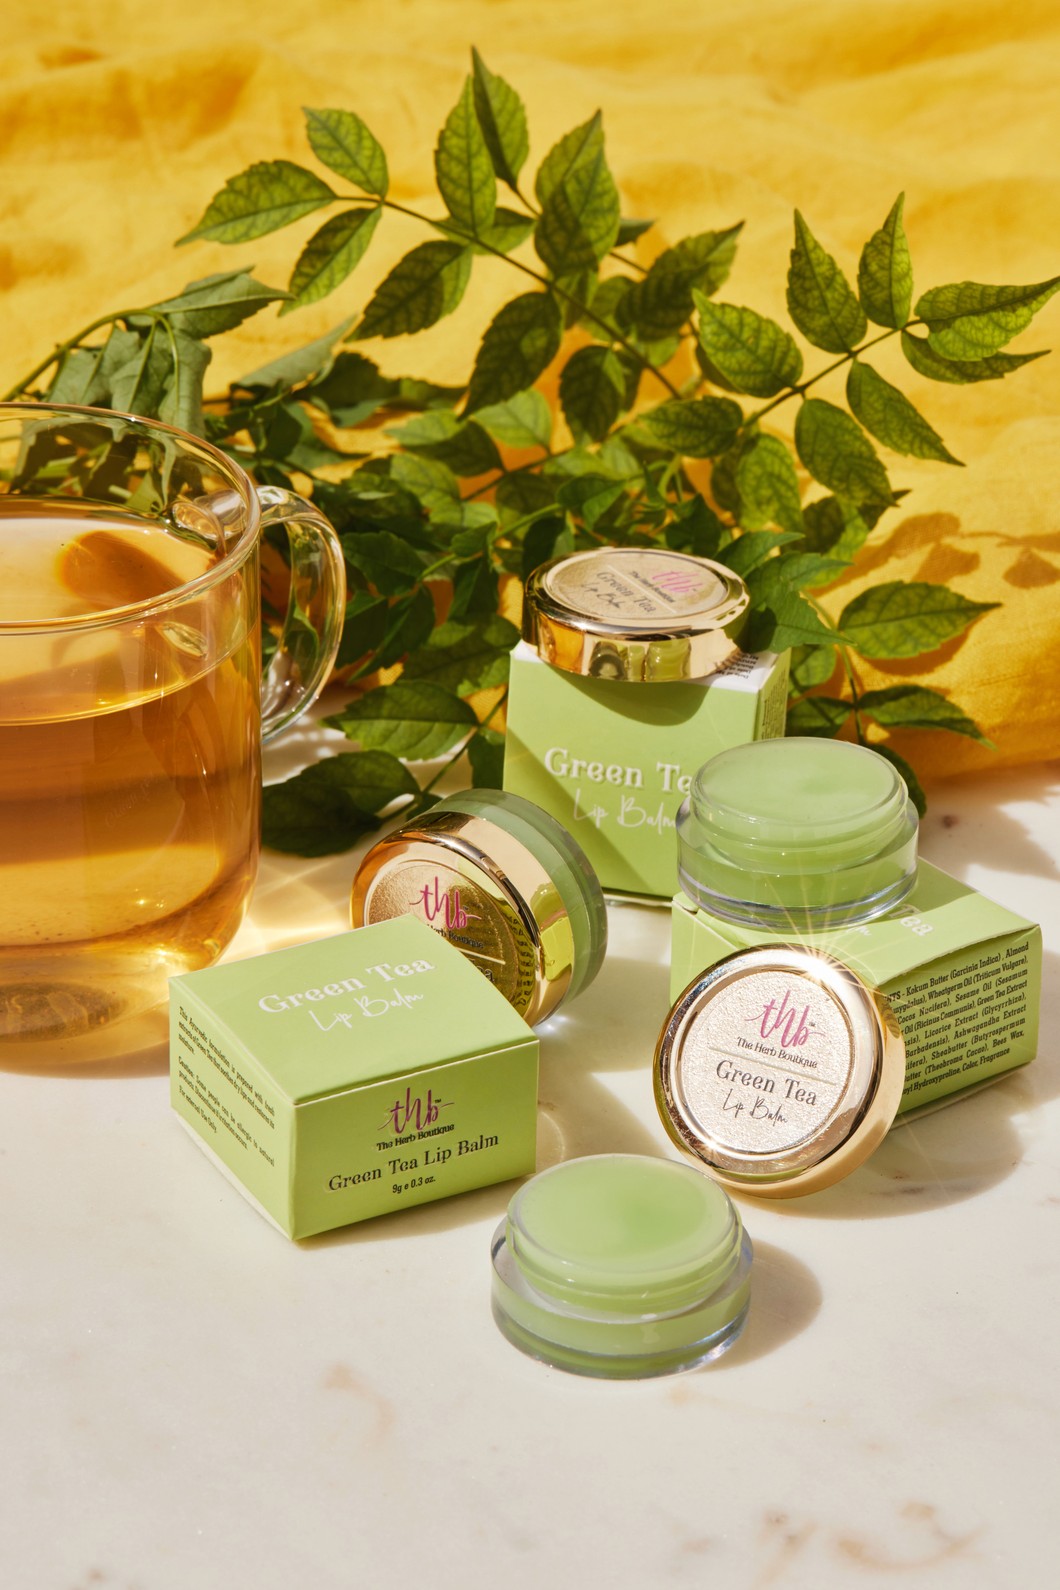 Product: The Herb Boutique Green Tea Lip Balm